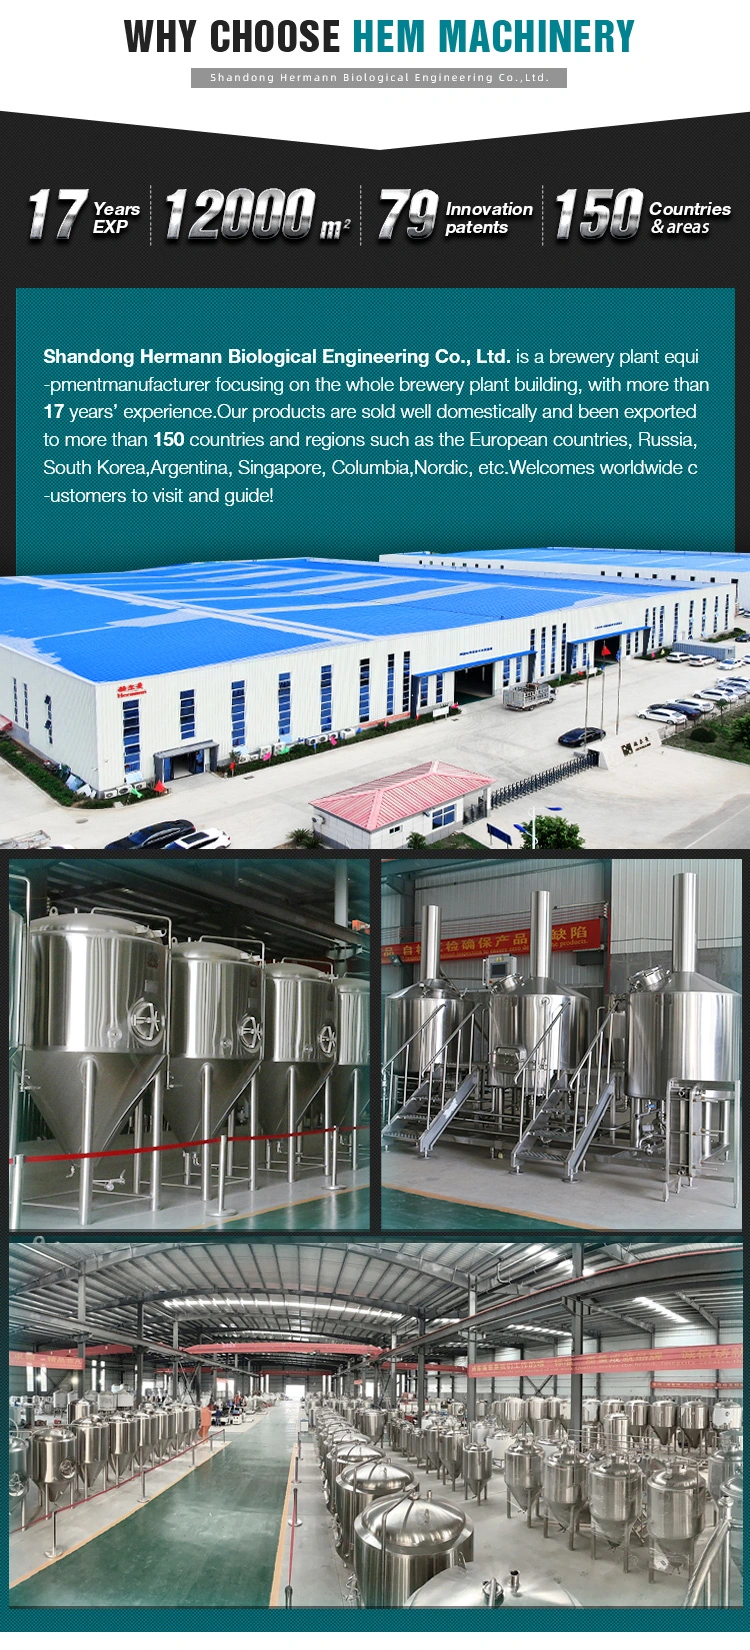 500L Brewery 500L 500L Brewery Stainless Steel Brewing Tanks/Equipment Home Beer Brewing 500L Brewery